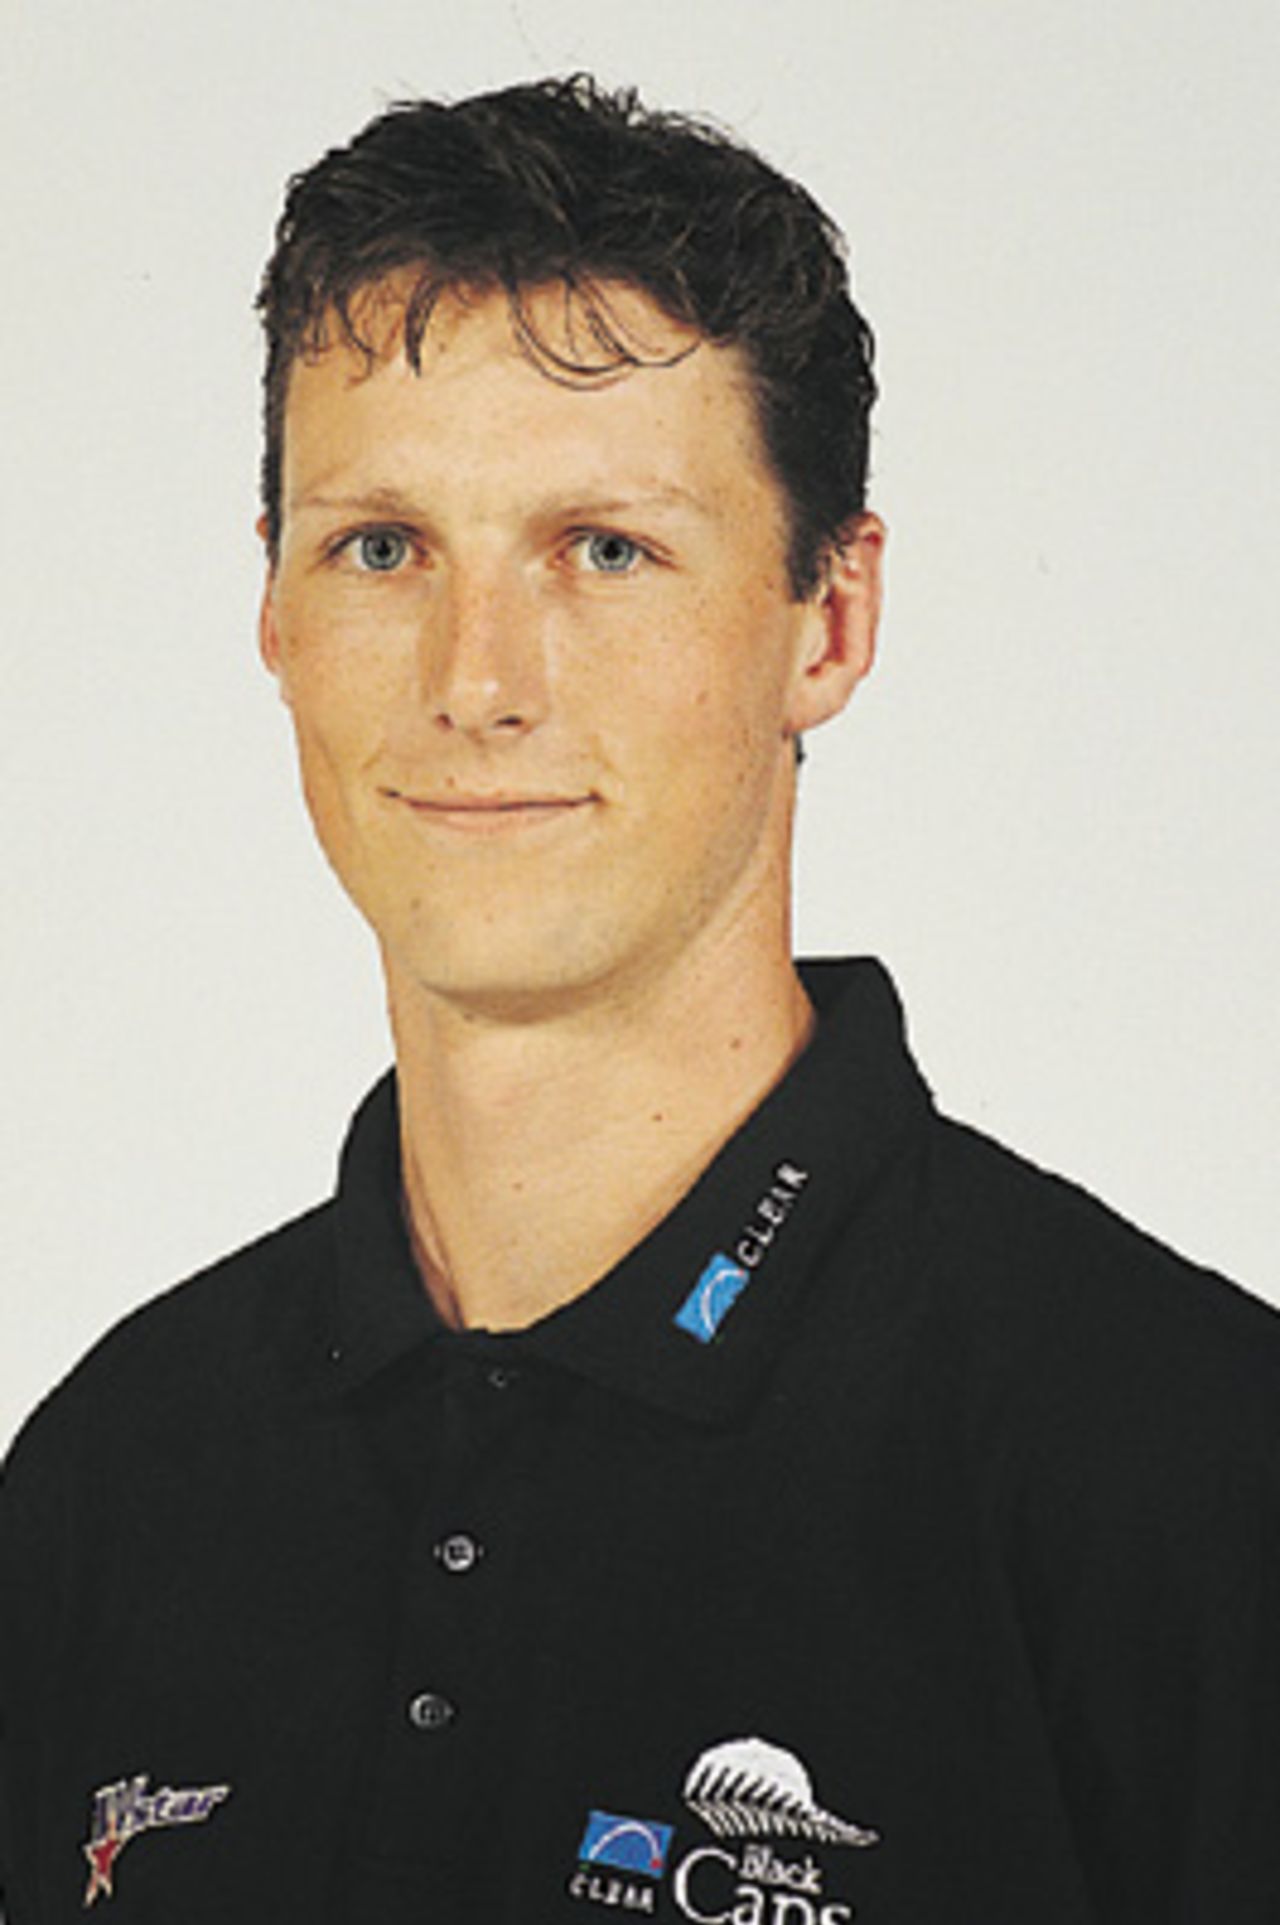 Portrait of Shayne O'Connor - New Zealand player in the 2000/01 season